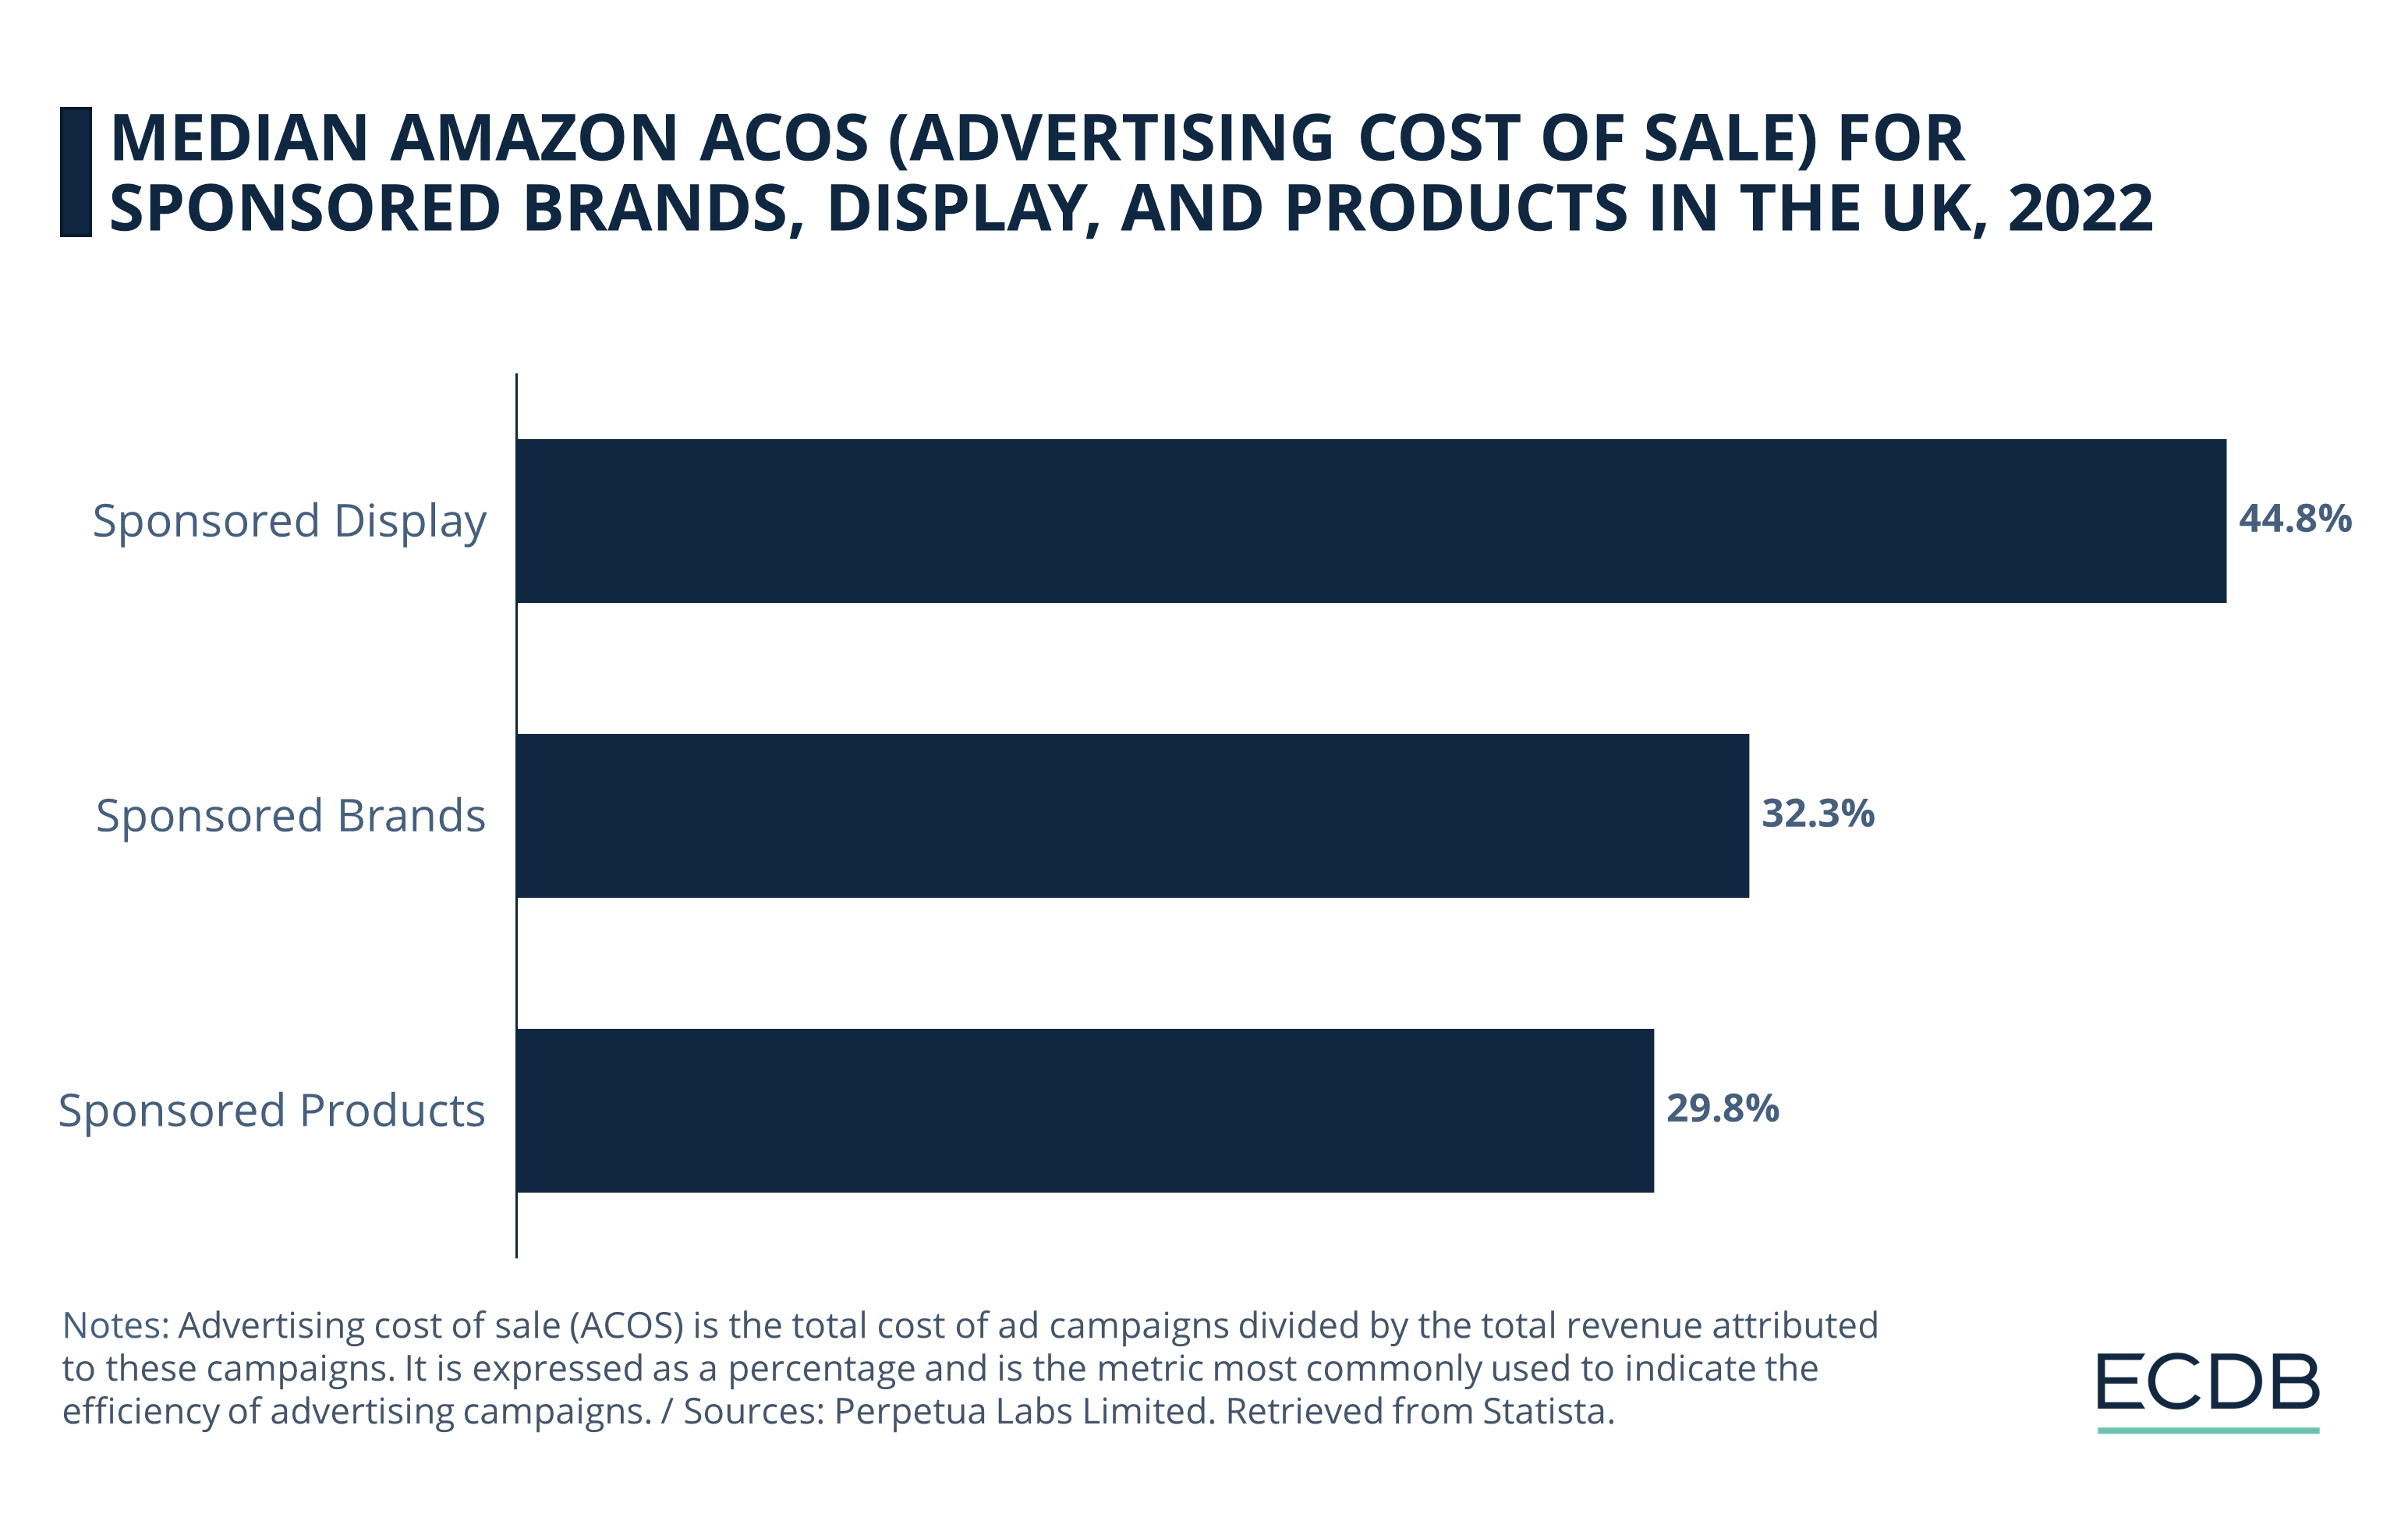 Median Amazon ACoS for Sponsored Brands, Display, and Products in the UK, 2022